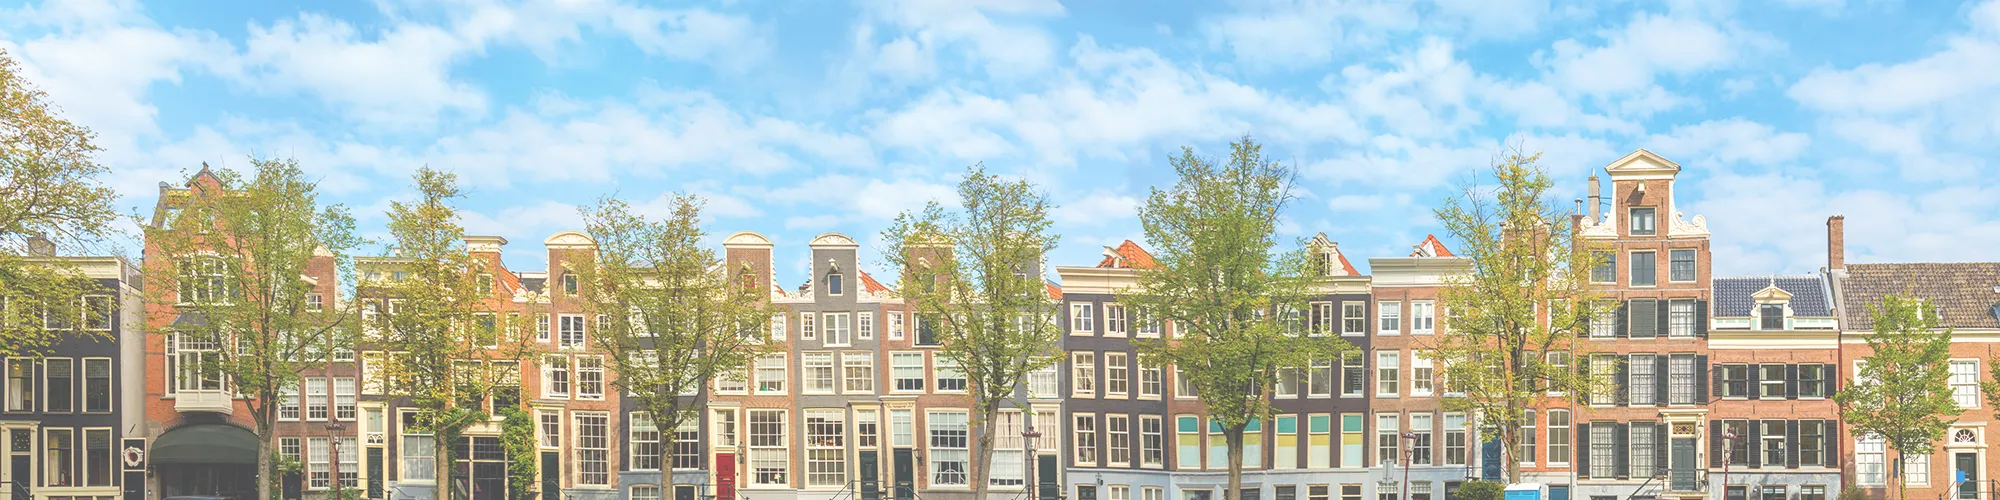 background image of row houses and blue sky. many people can sign up for membership benefits